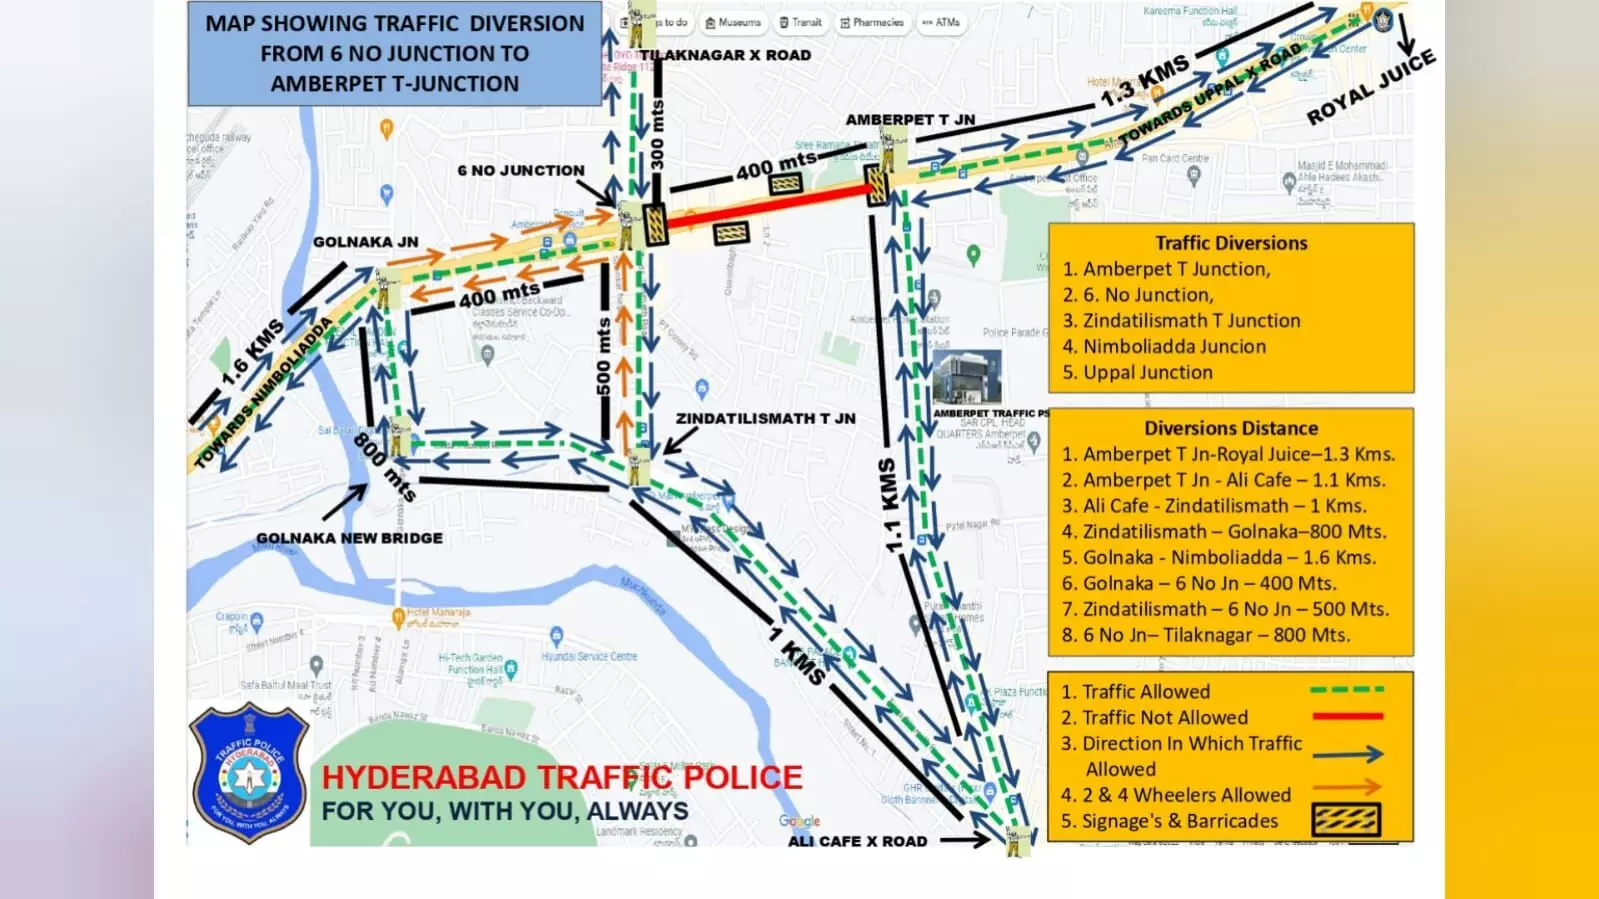 Amberpet Flyover: Route between Junction 6-T Junction closed from August 16 until construction ends